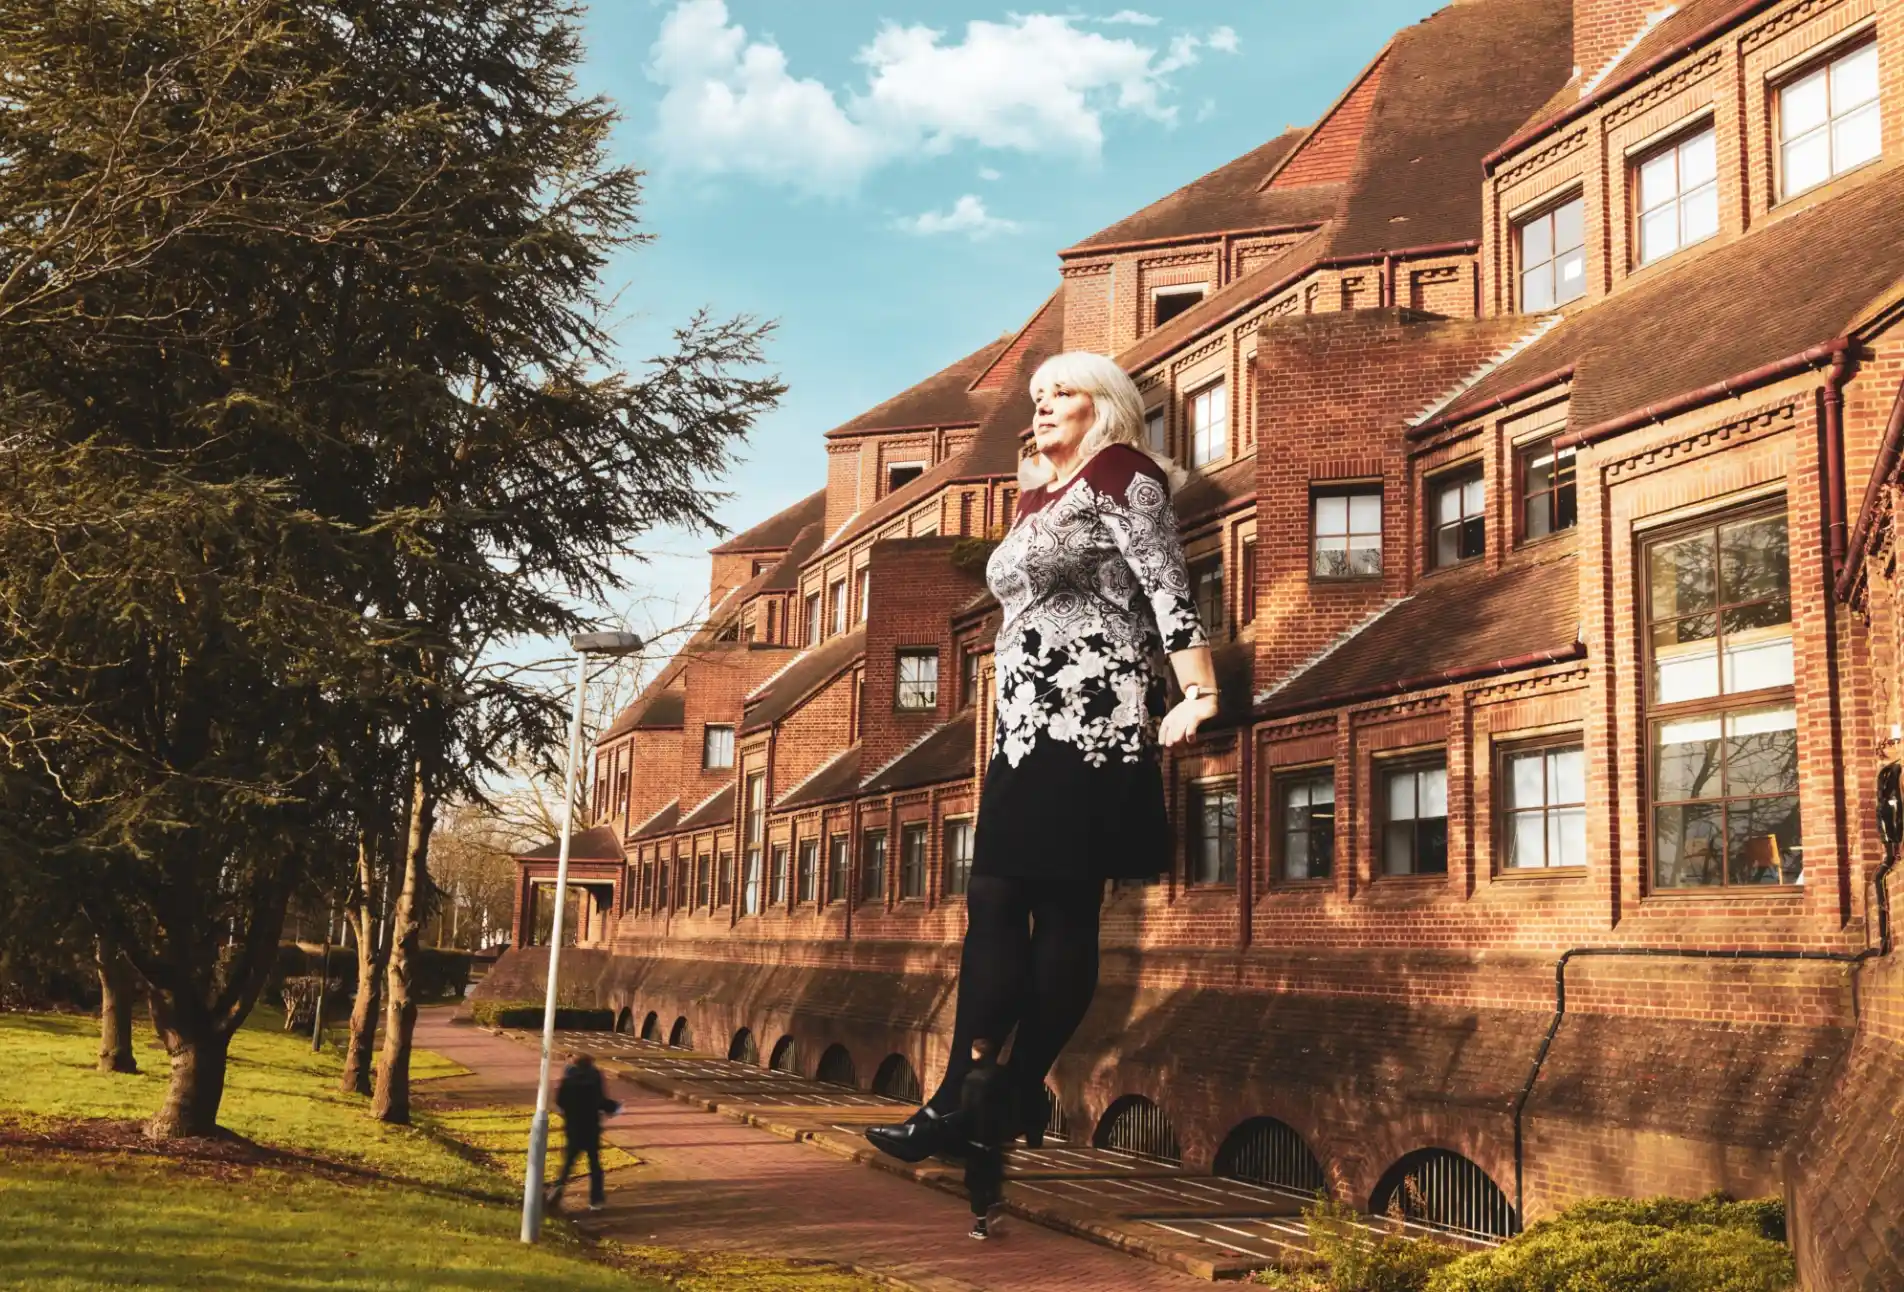 Giant woman leans against a sun-soaked residential building.